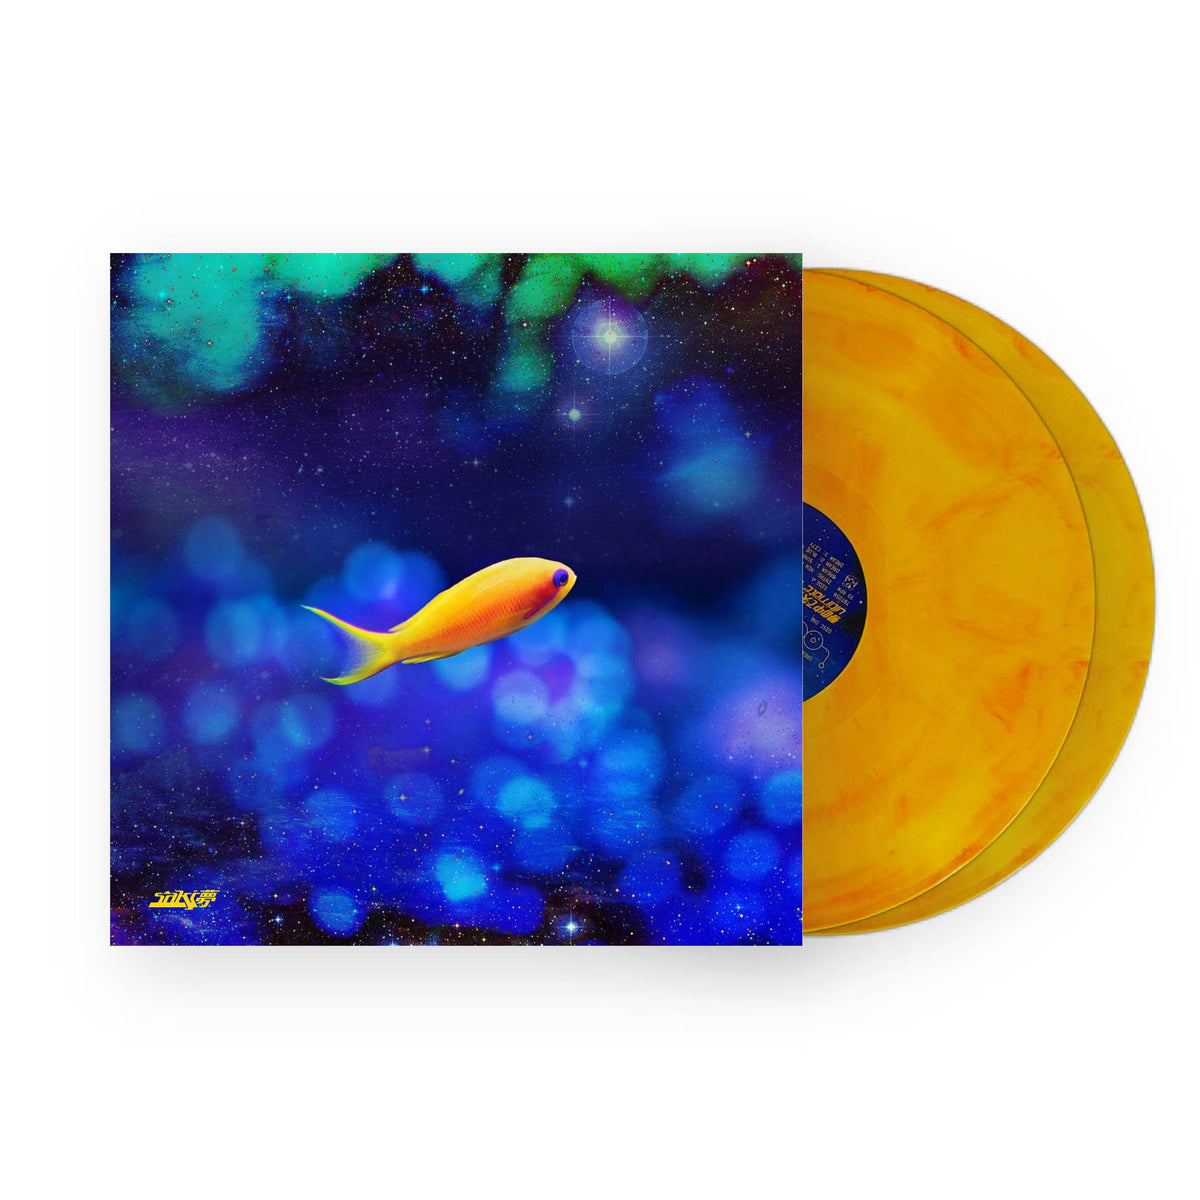 S a k i 夢 - 夢の中で失われました [Ultimate Edition] Lost In A Dream 2xLP (Orange